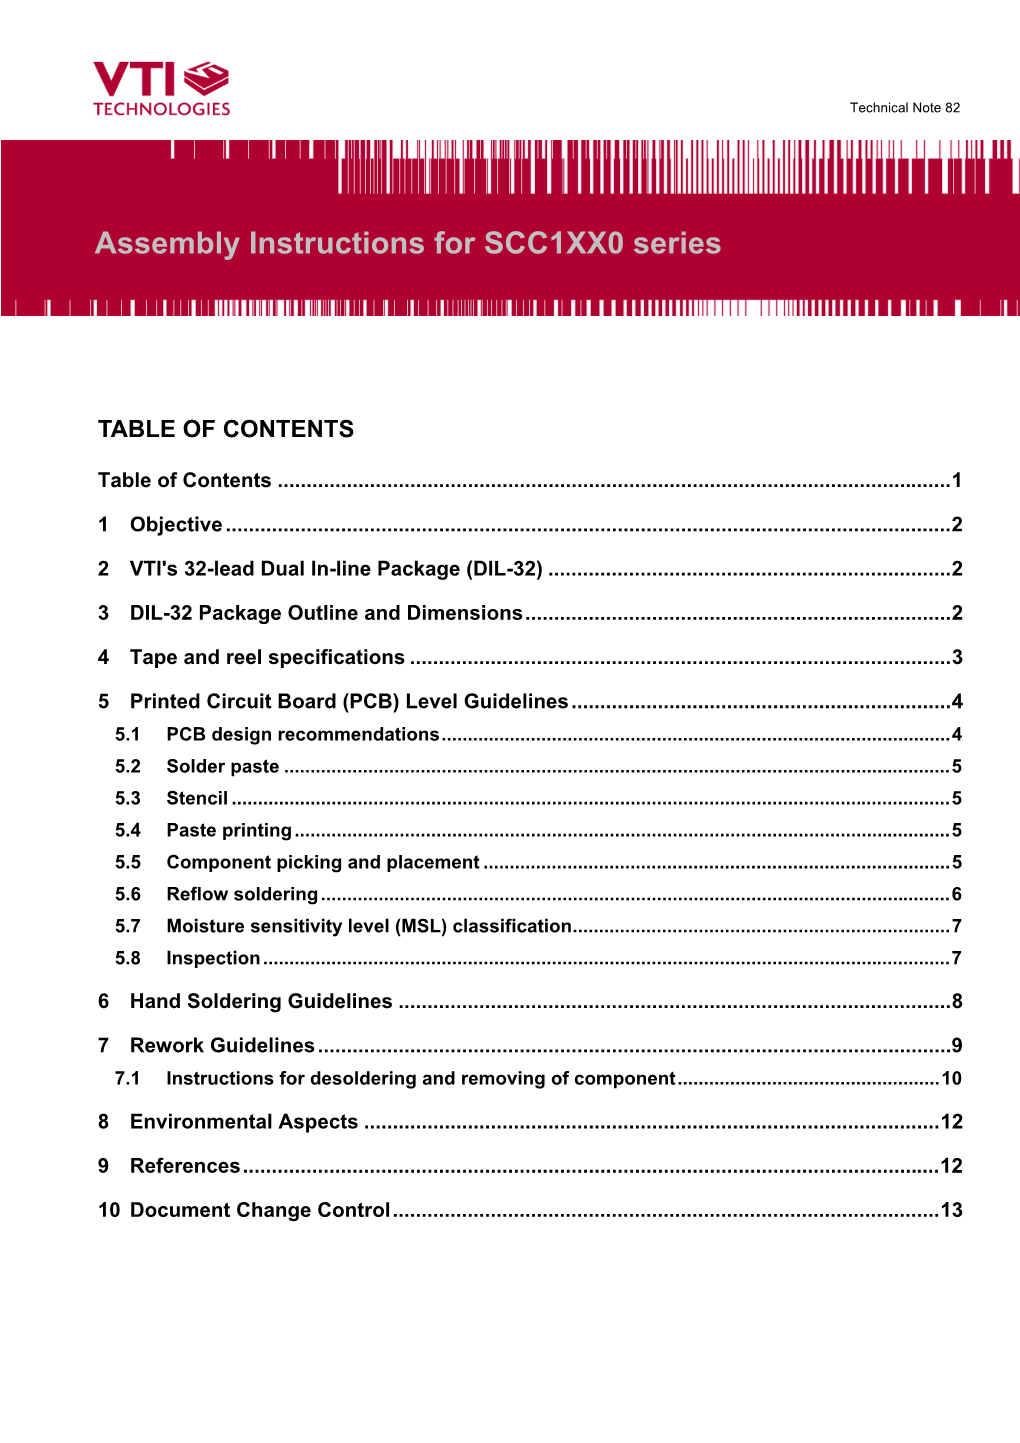 Assembly Instructions for SCC1XX0 Series